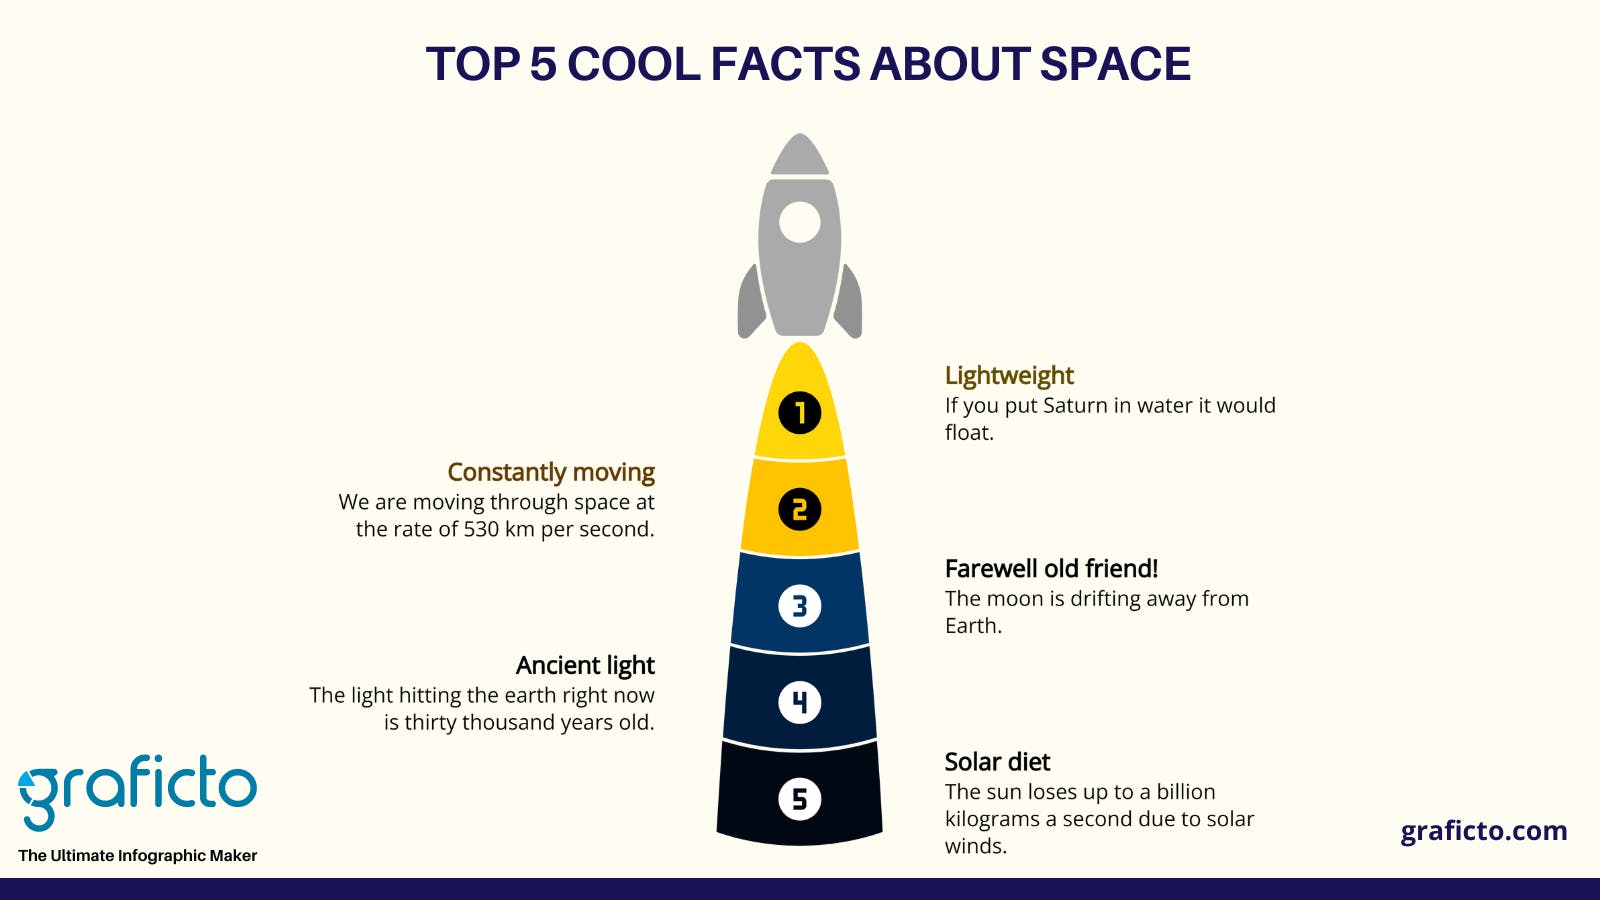 Infographic design of top 5 cool facts about space